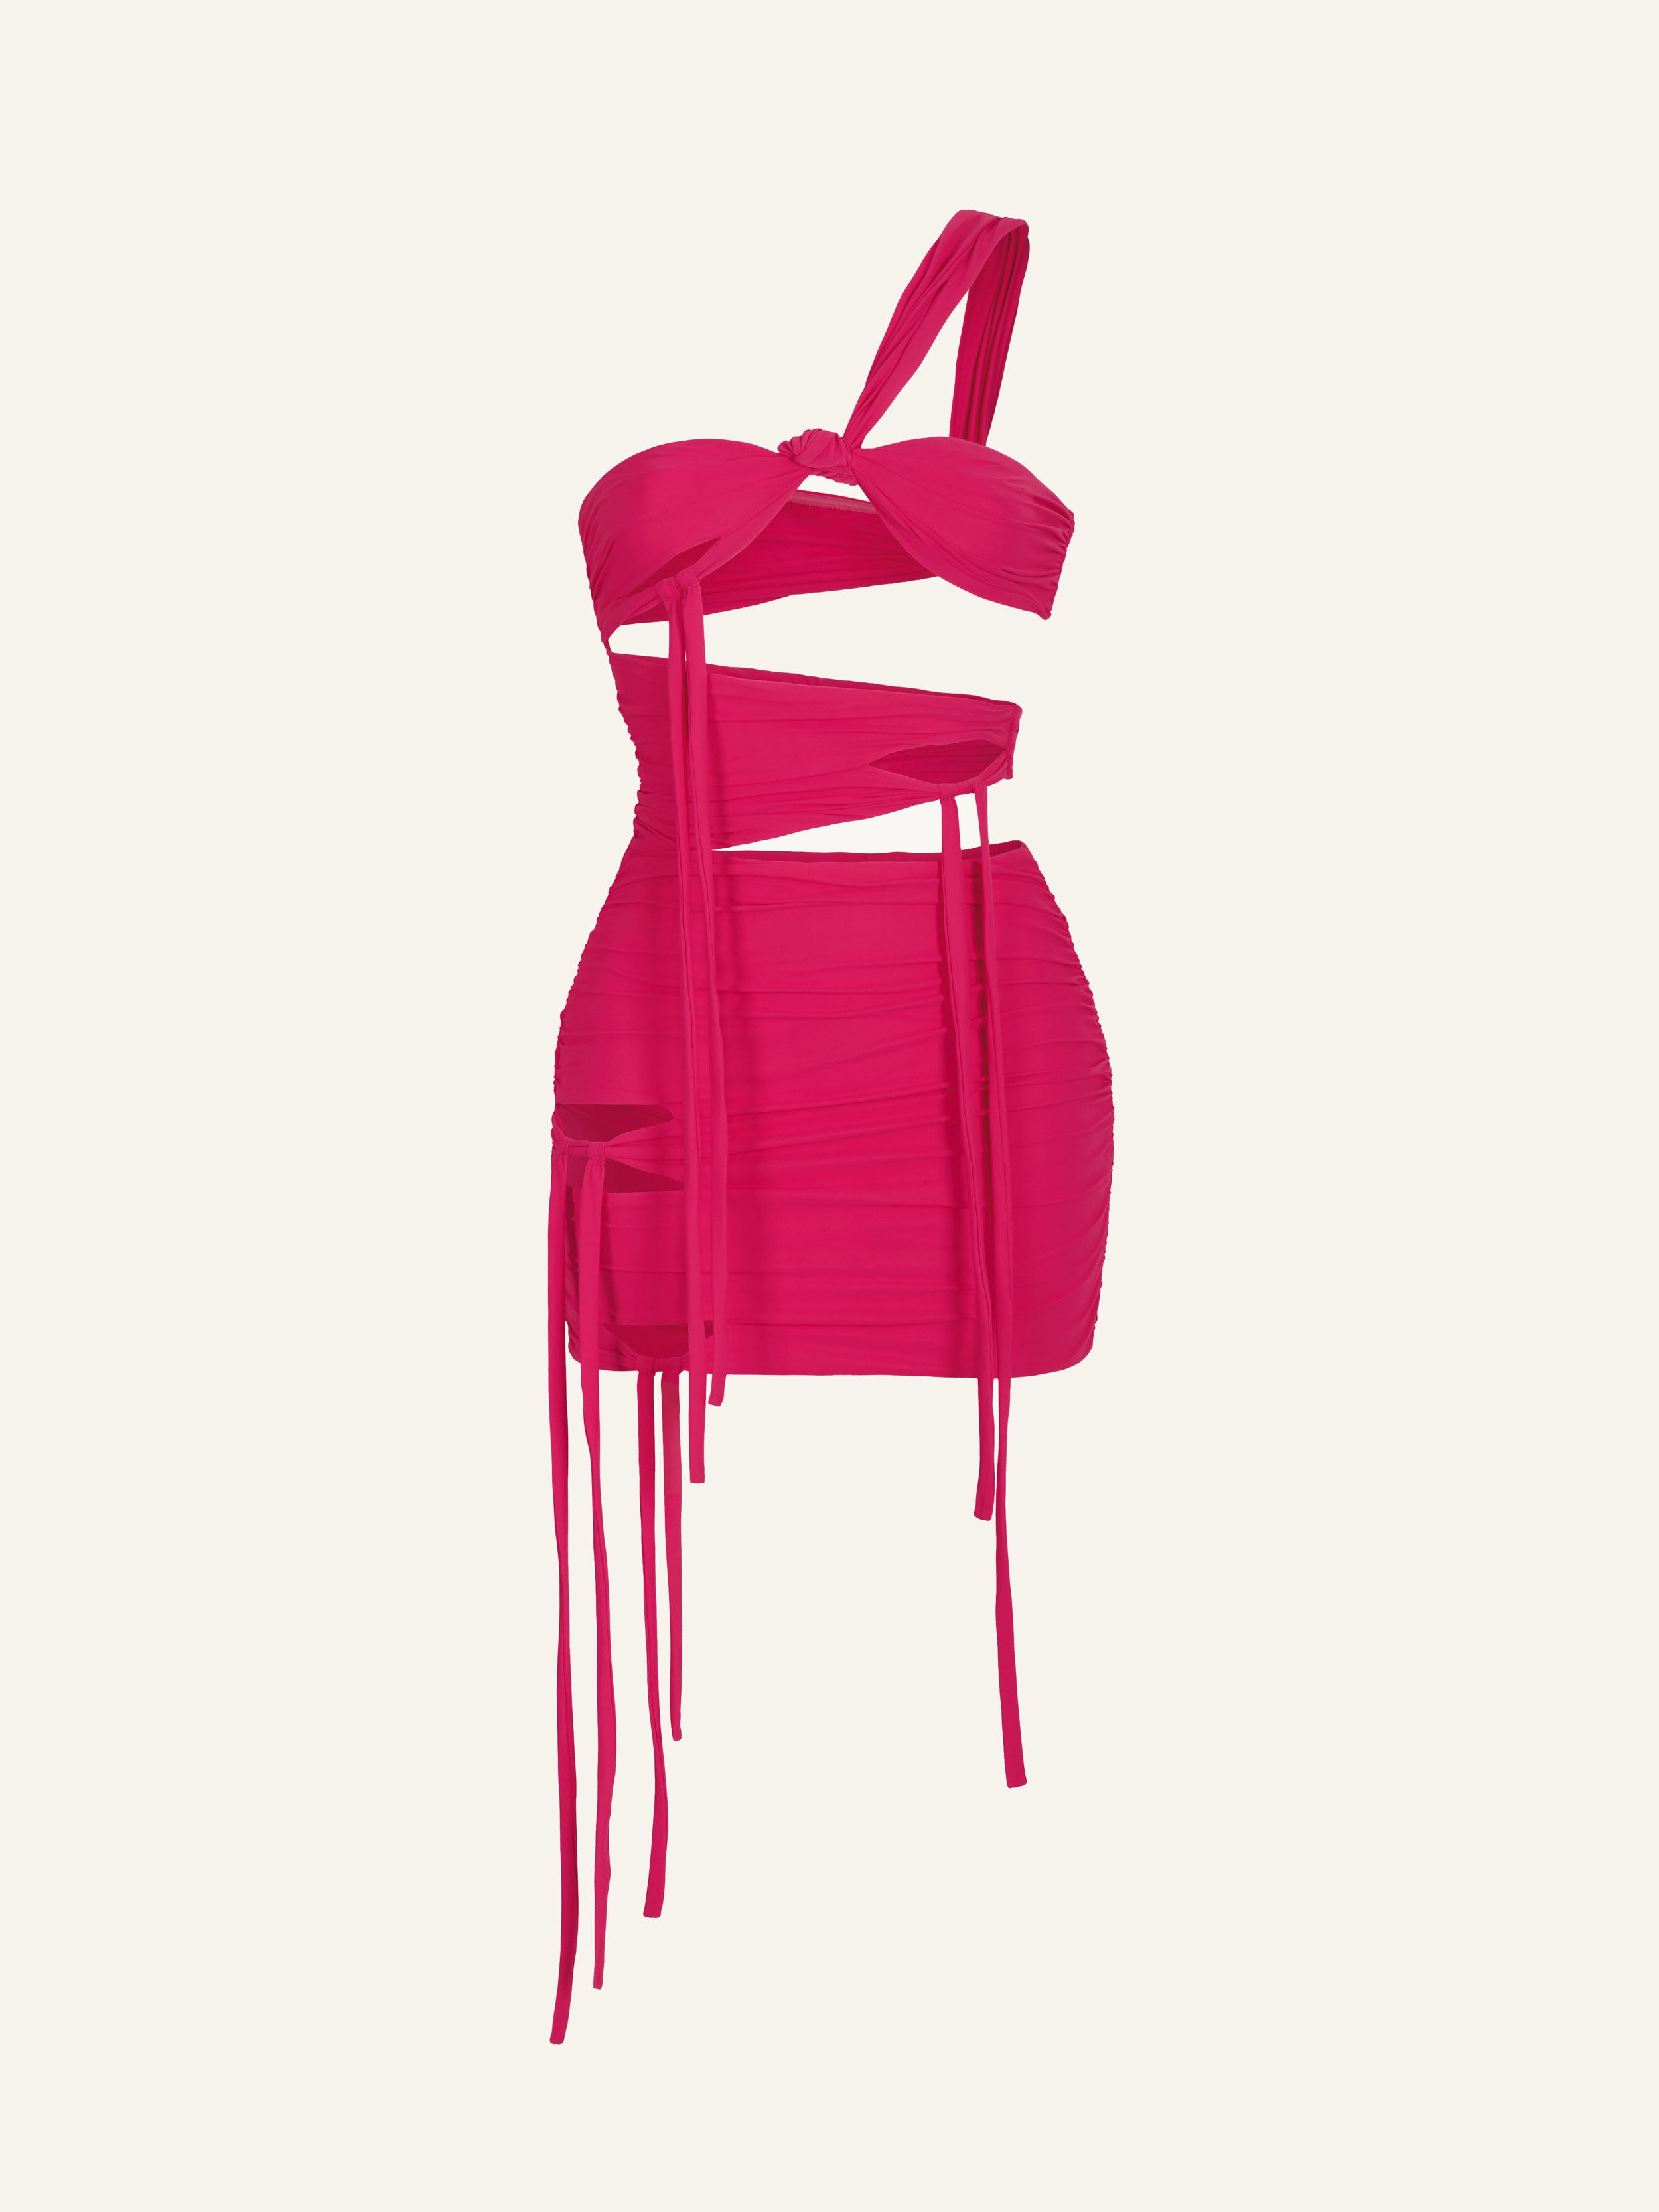 Product photo of a pink one shoulder mini dress with extended laces, featuring horizontal cuts